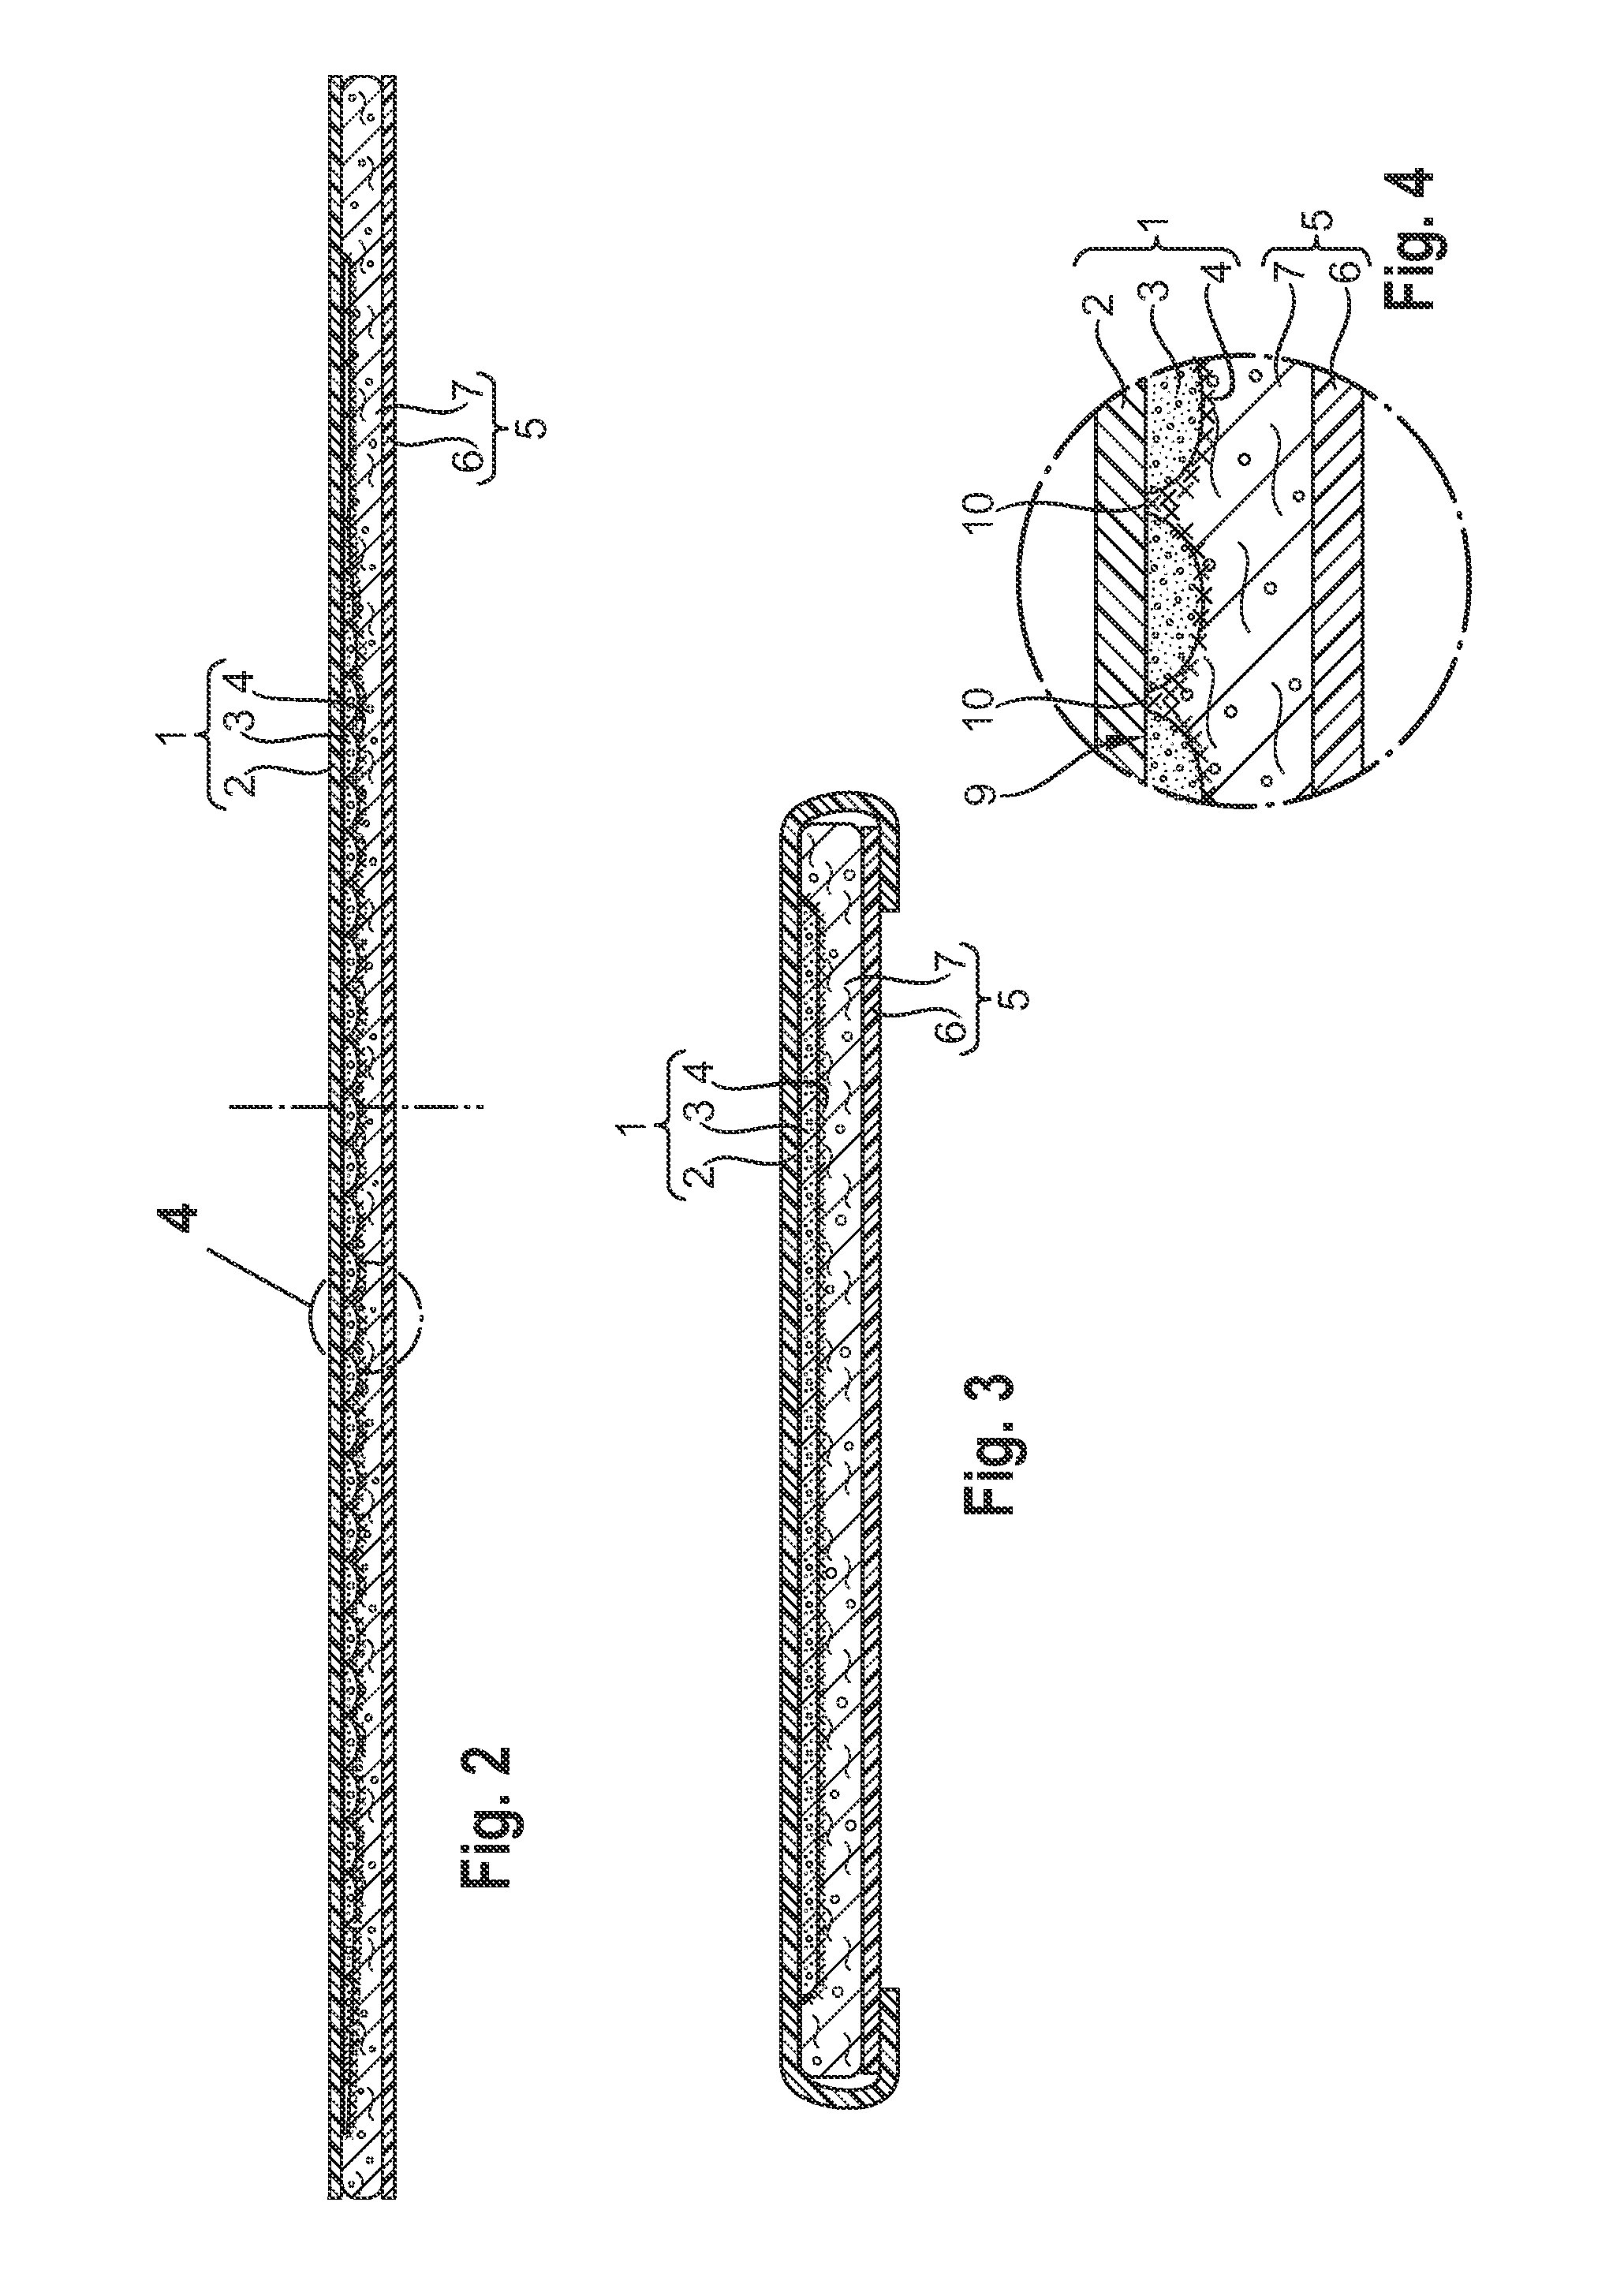 Absorbent Core For Use In Absorbent Articles